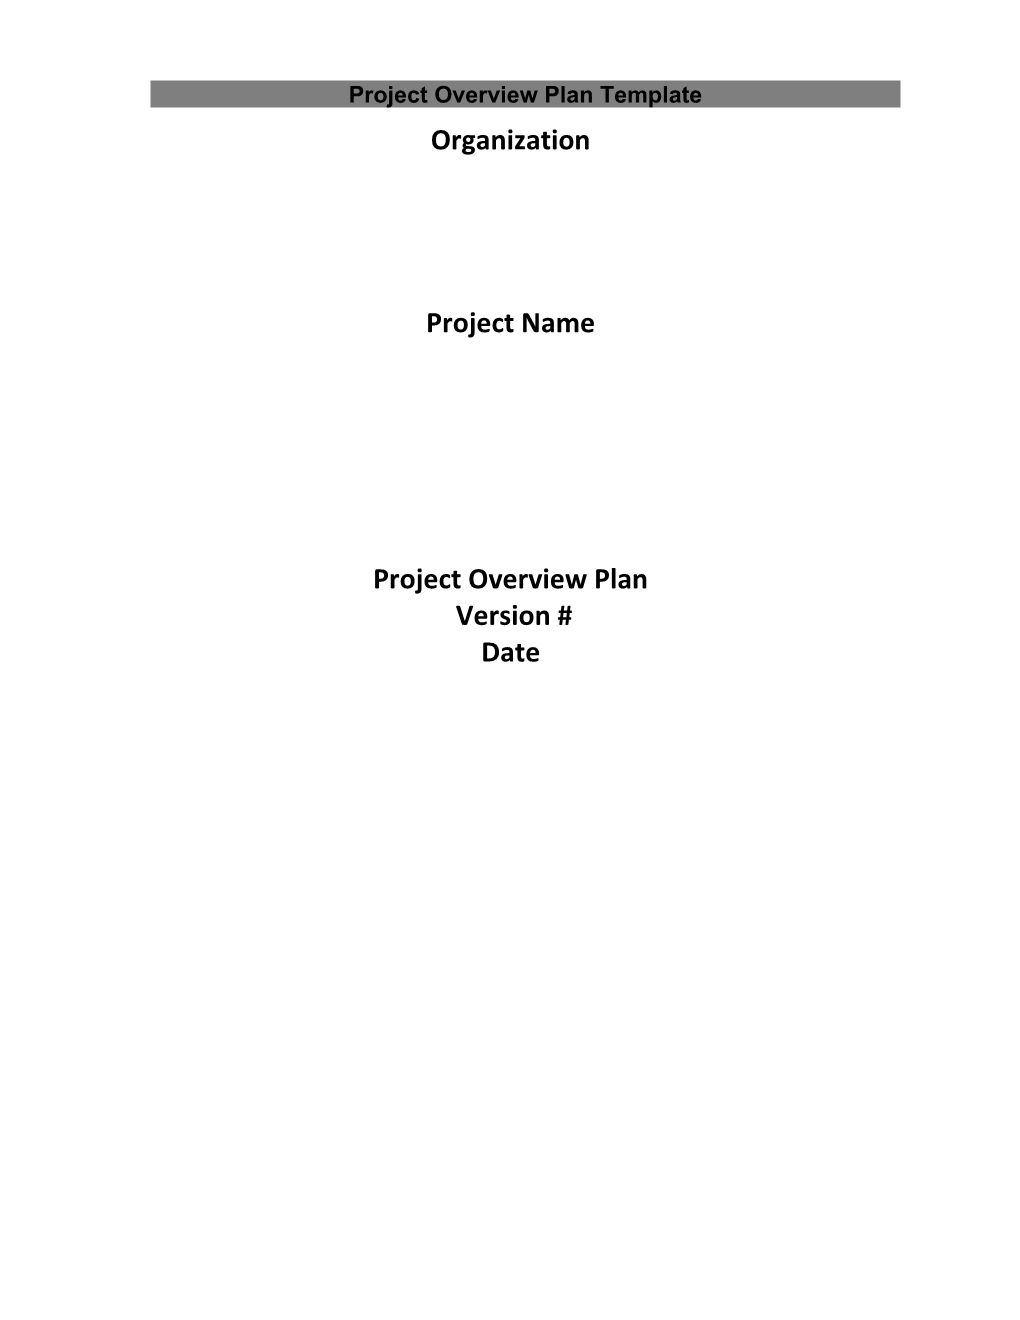 Project Overview Plan